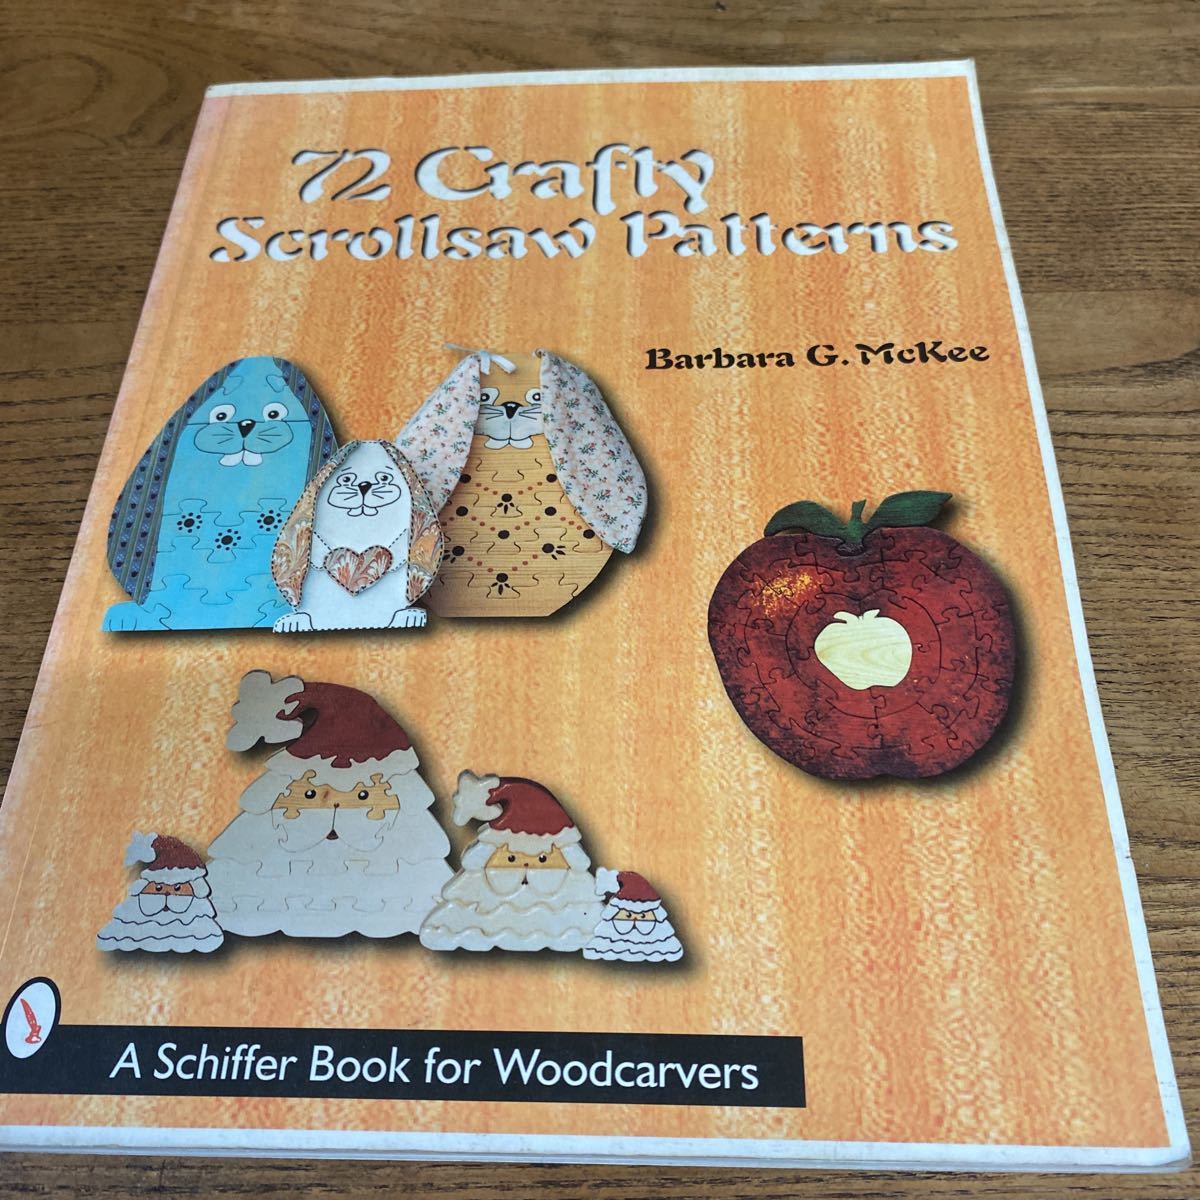 72 Crafty Scrollsaw Patterns Schiffer Book for Woodcarvers 洋書